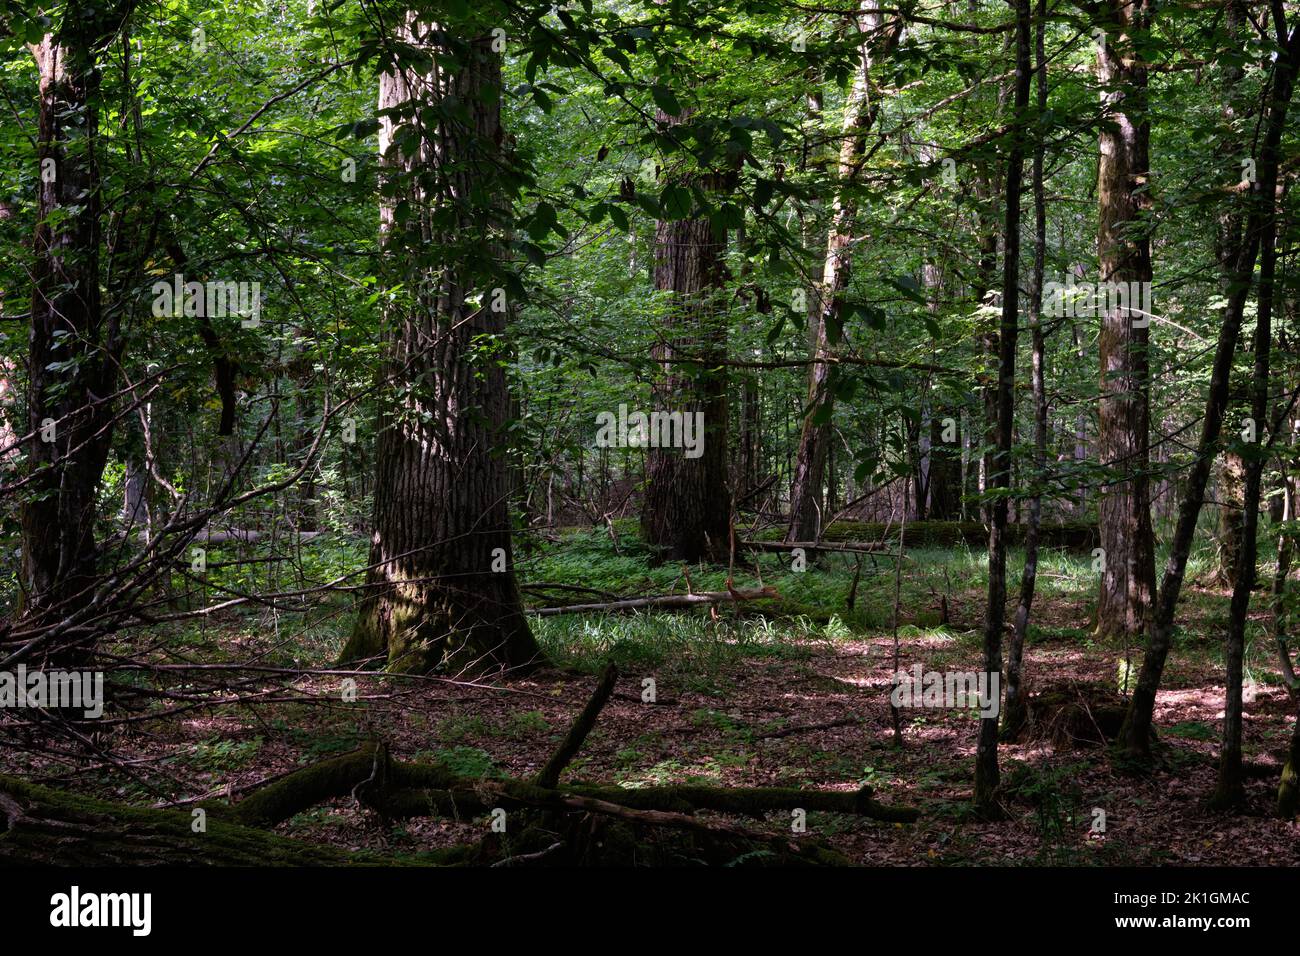 Shady deciduous tree stand with oak trees in background, Bialowieza Forest, Poland, Europe Stock Photo